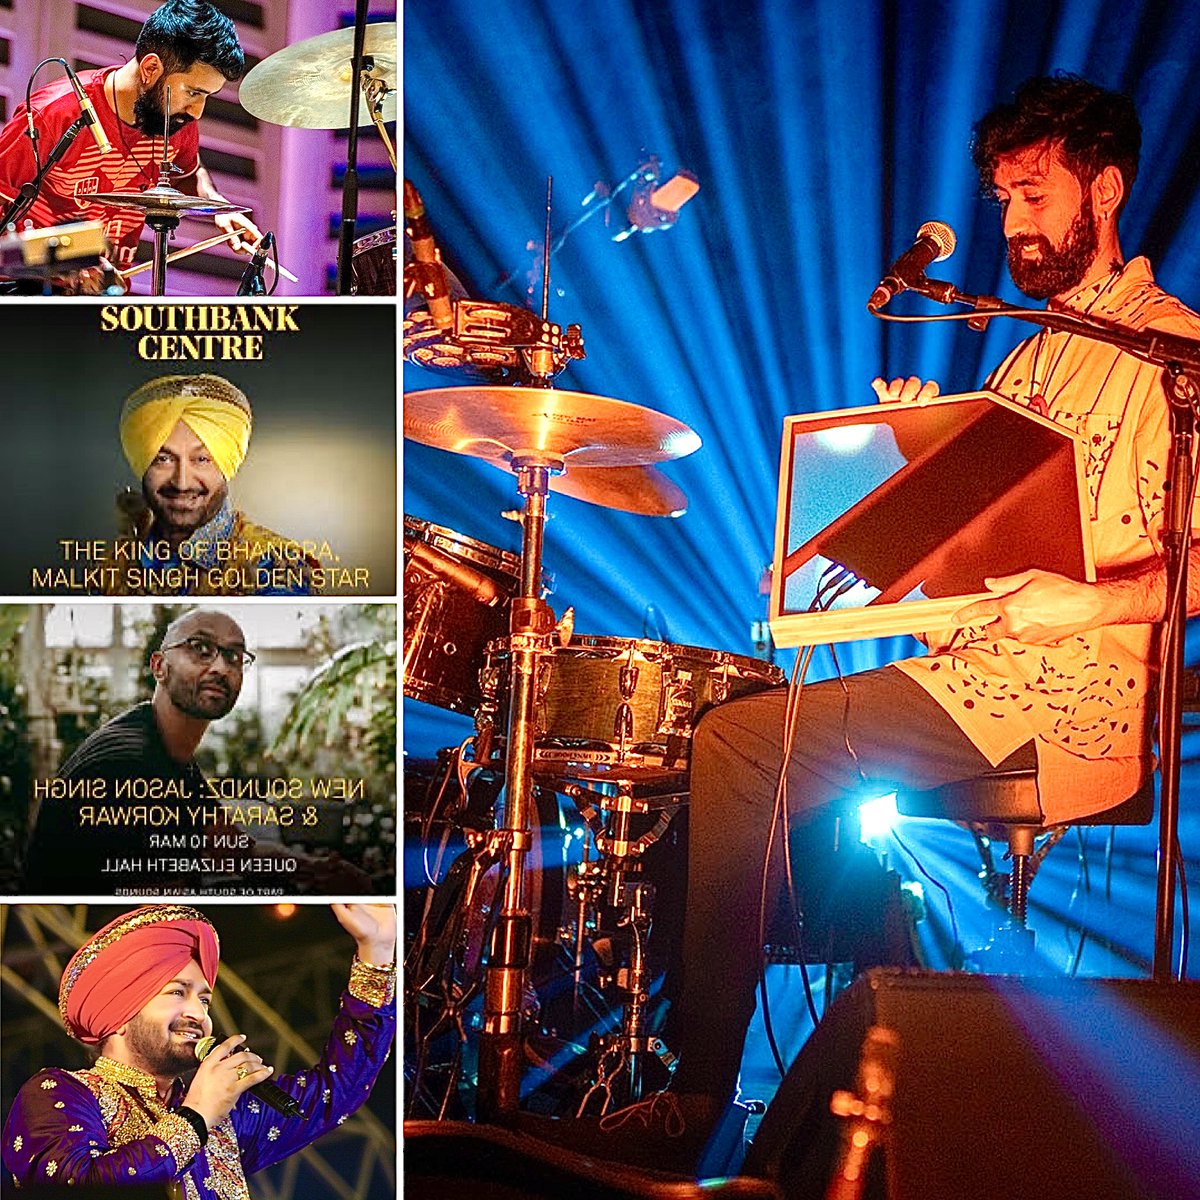 Genre-defying #music inspired by Geology, #Jazz & #JimiHendrix! Hear #composer #percussionist @SarathyKorwar with @djritu1 🎧Anytime @Mixcloud💃 bit.ly/AWILum146 📻Weds28Feb @ResonanceFM 6.30pm @southbankcentre #concert March 10 #music #drums #tabla #london #concert #gig